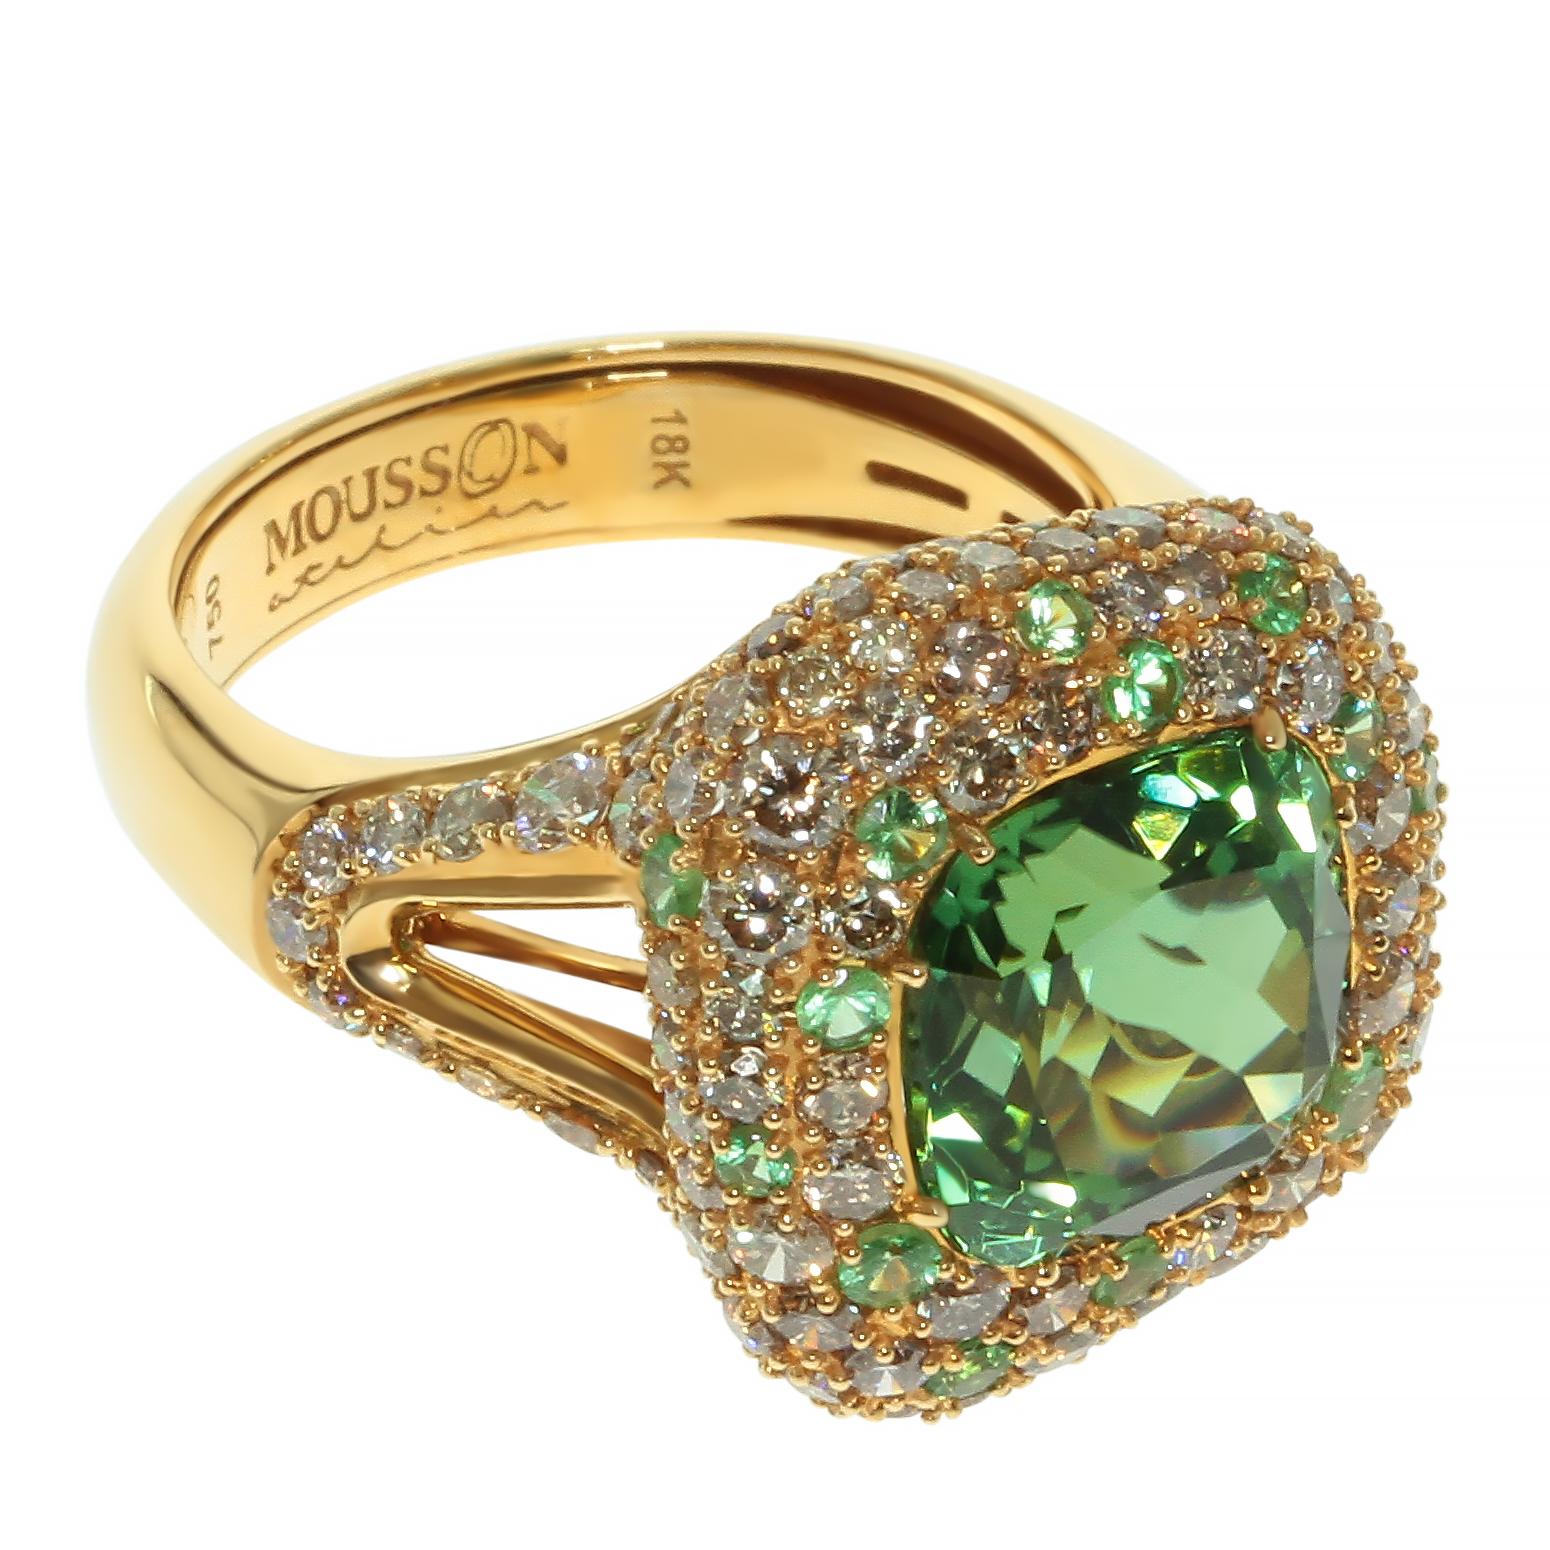 Green Tourmaline Diamond 18 Karat Yellow Gold Ring
Pure Green 5.2 carat Tourmaline supported by 2.67 carat of Champagne Diamonds and 0.52 carat of Tsavorites in this Ring.
Asymmetrical shape for those who want to wear and appreciate the design